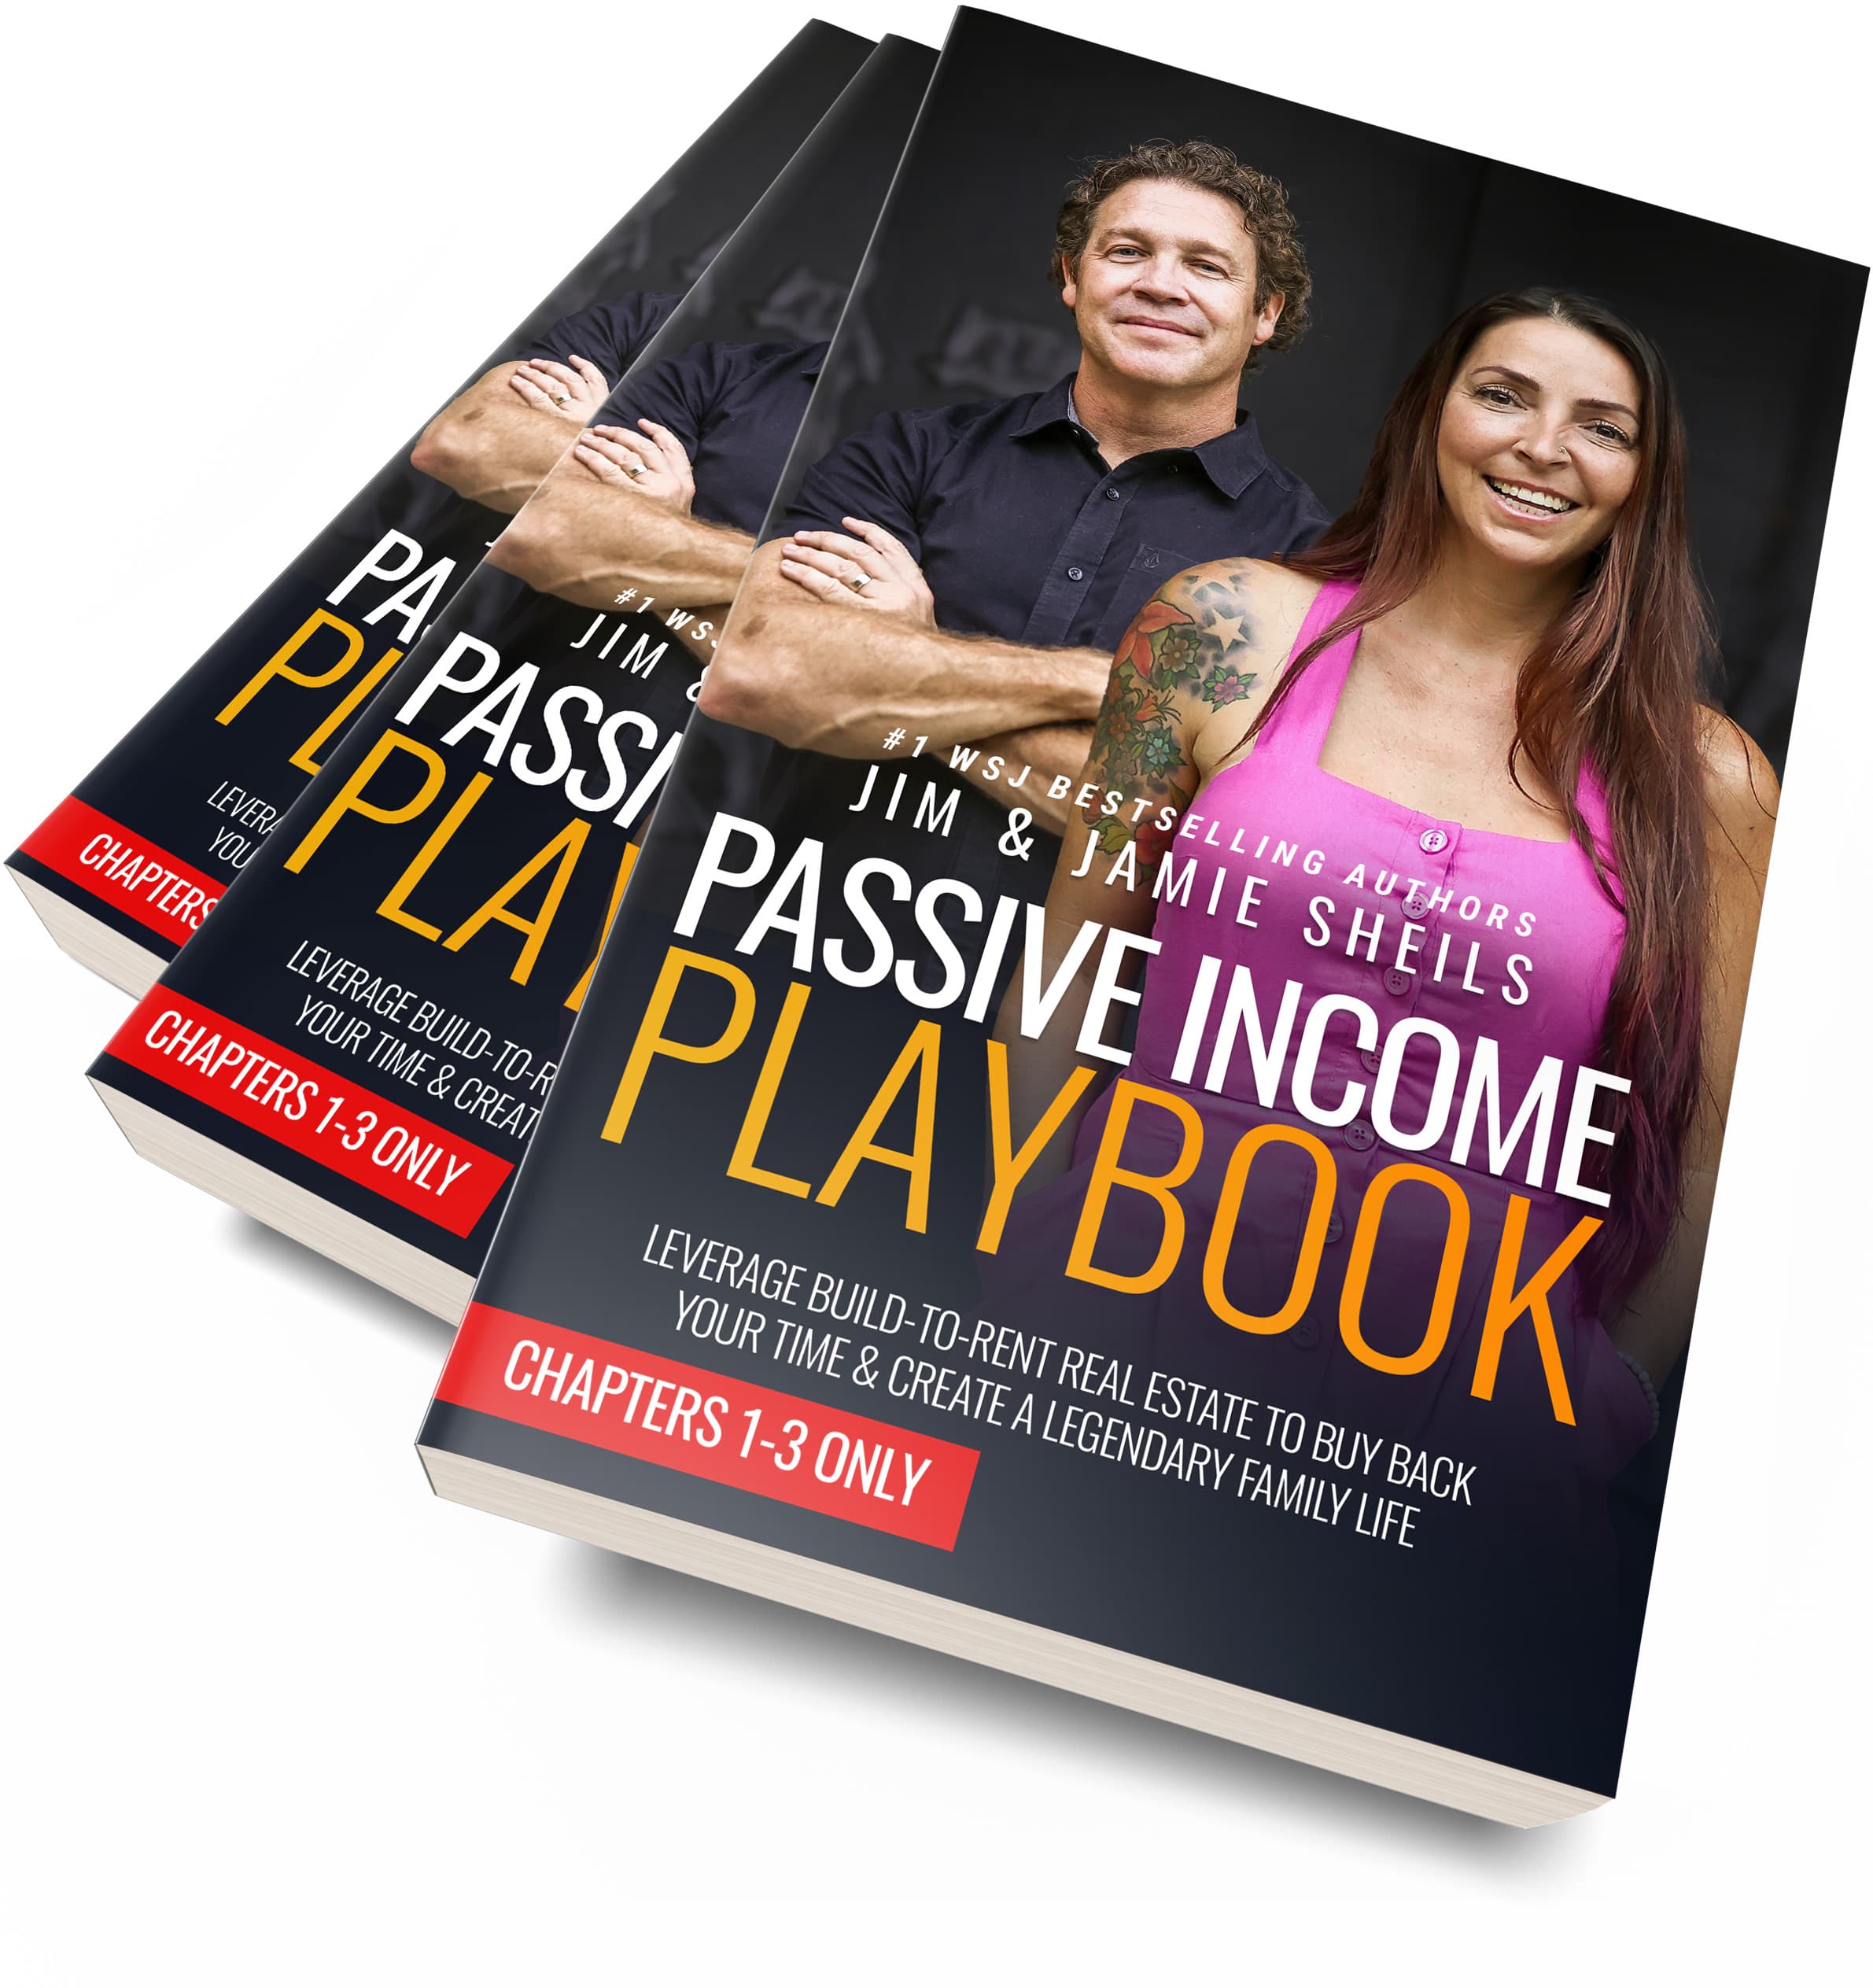 Jim & Jamie Sheils - Passive Income Playbook - Free Chapters